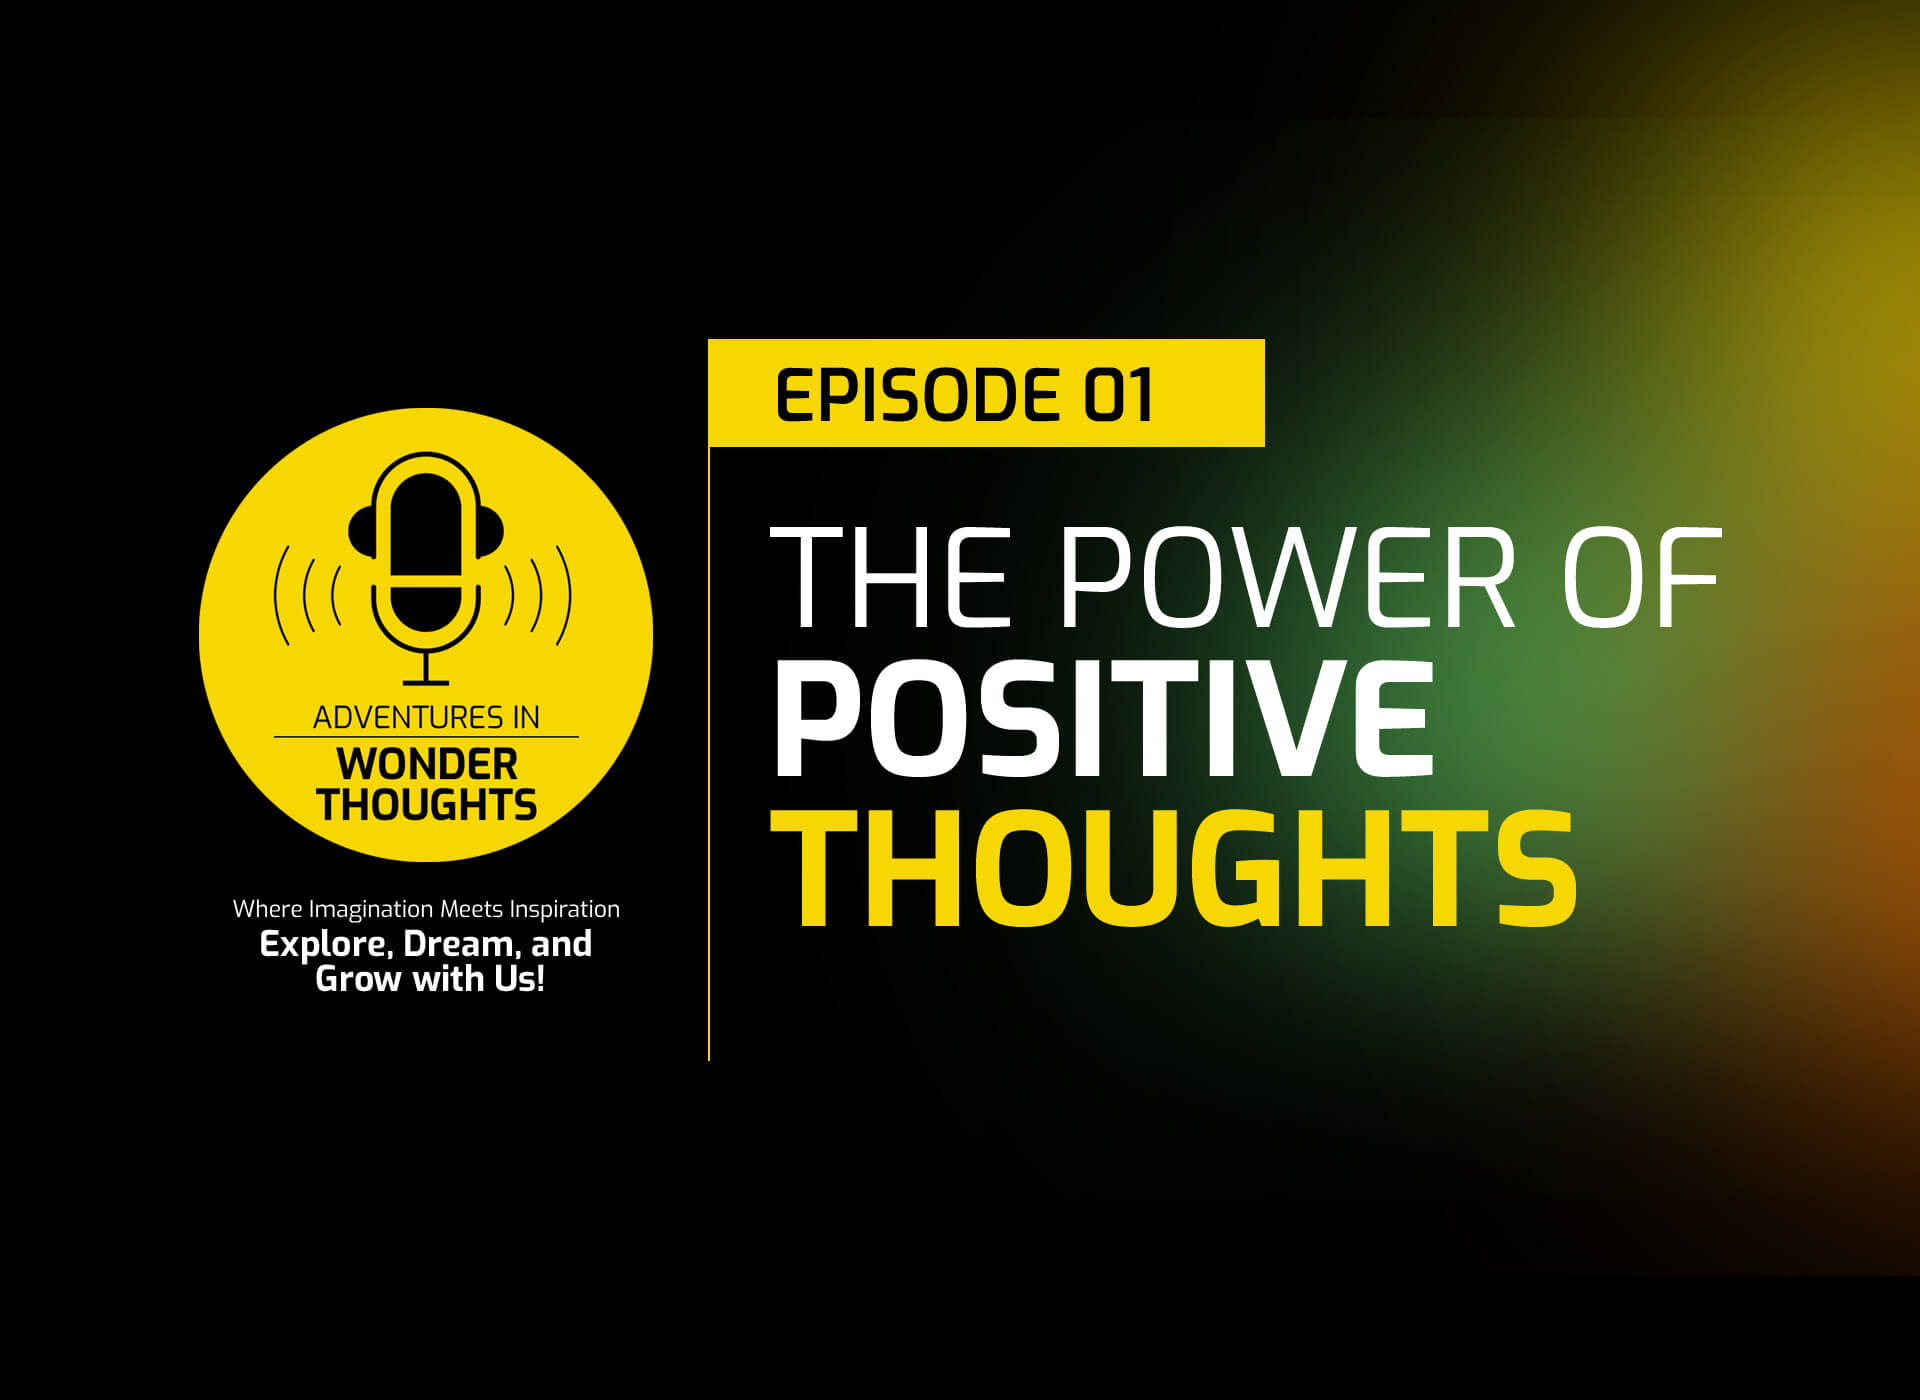 Episode 01: The Power of Positive Thoughts